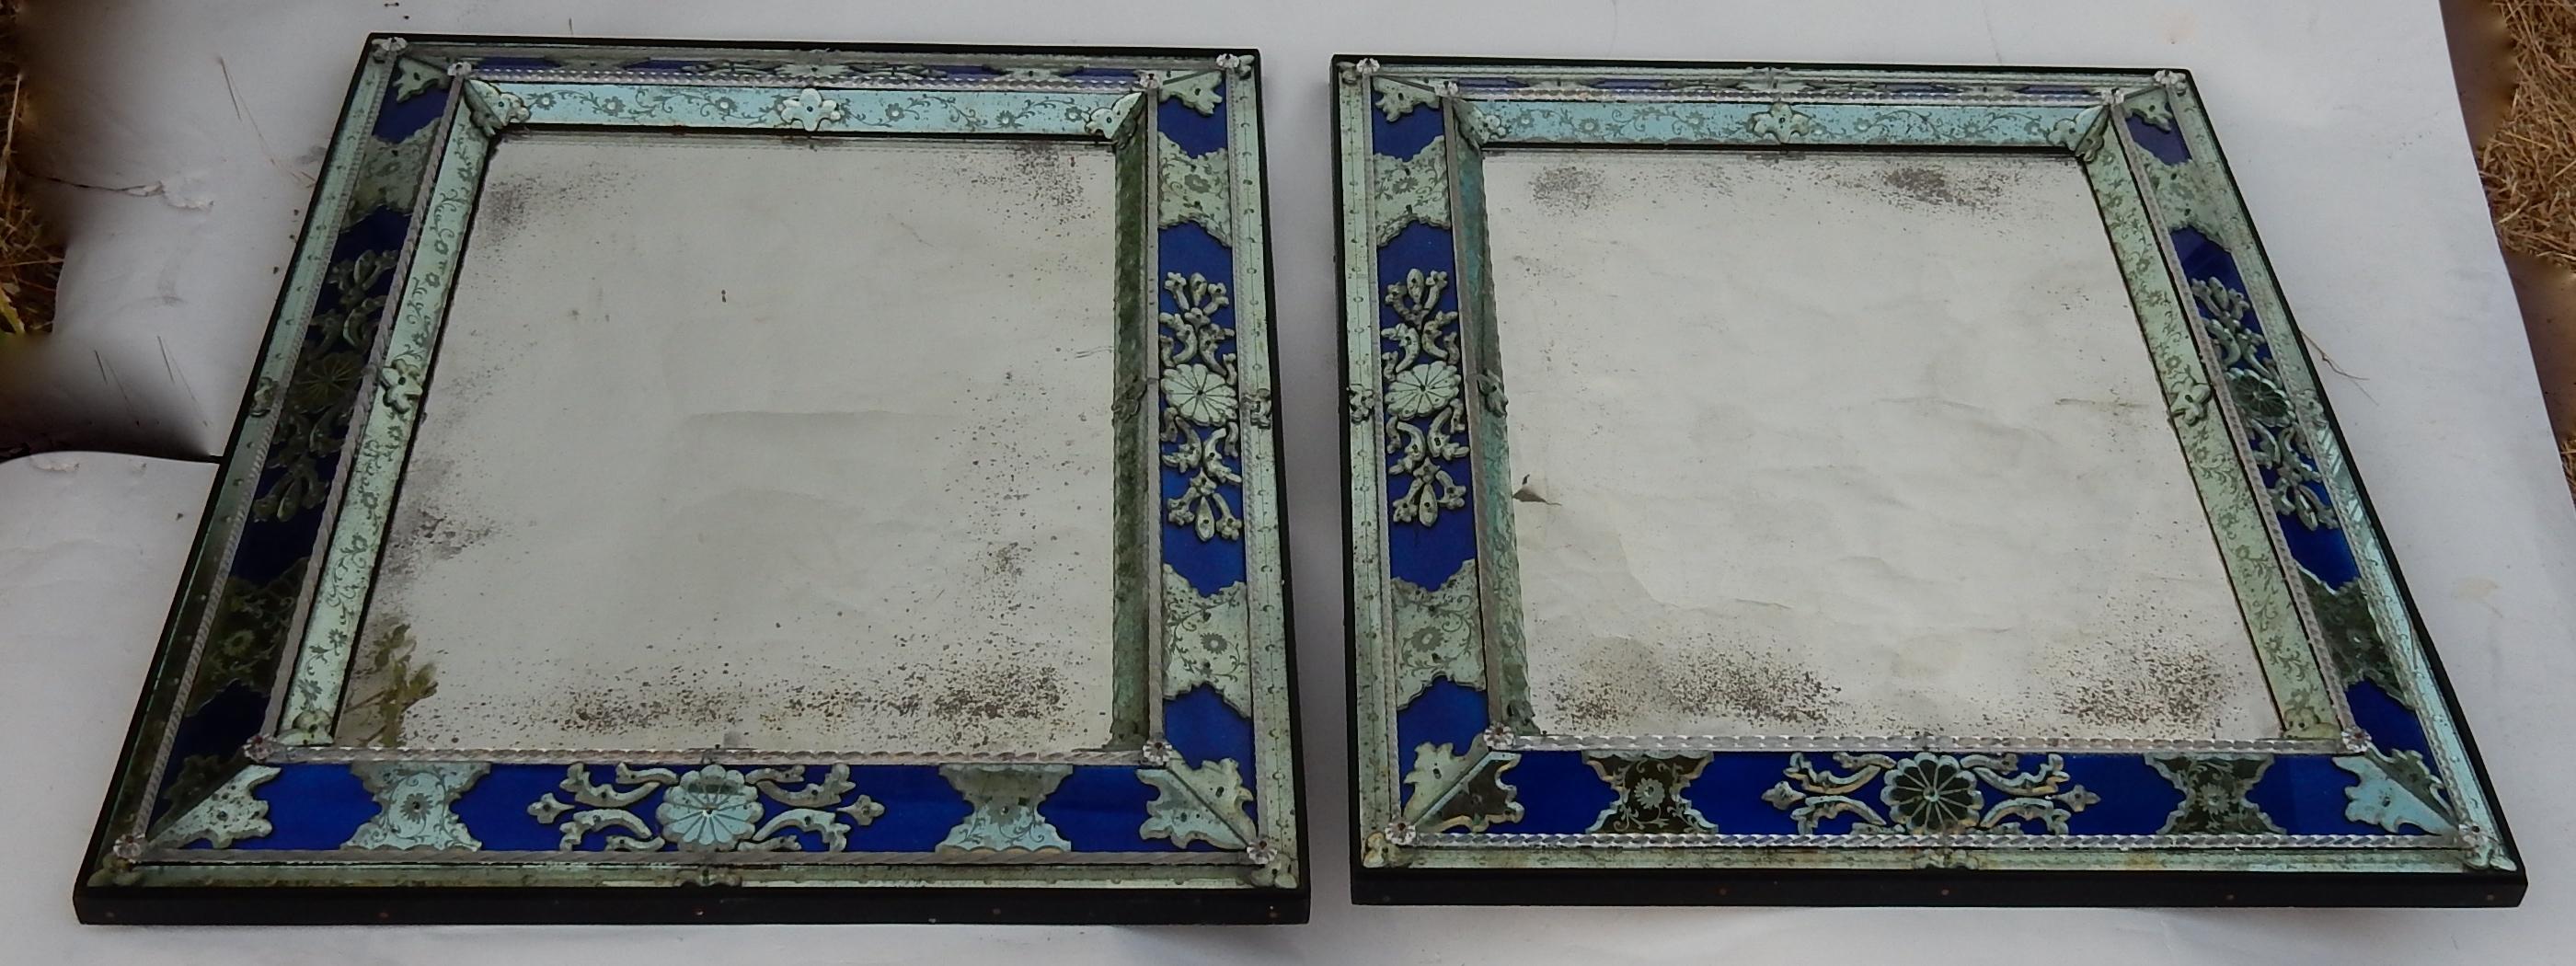 1970-1980 Pair of Louis XIV Style Venice Mirrors with Blue Glass Ornaments For Sale 8